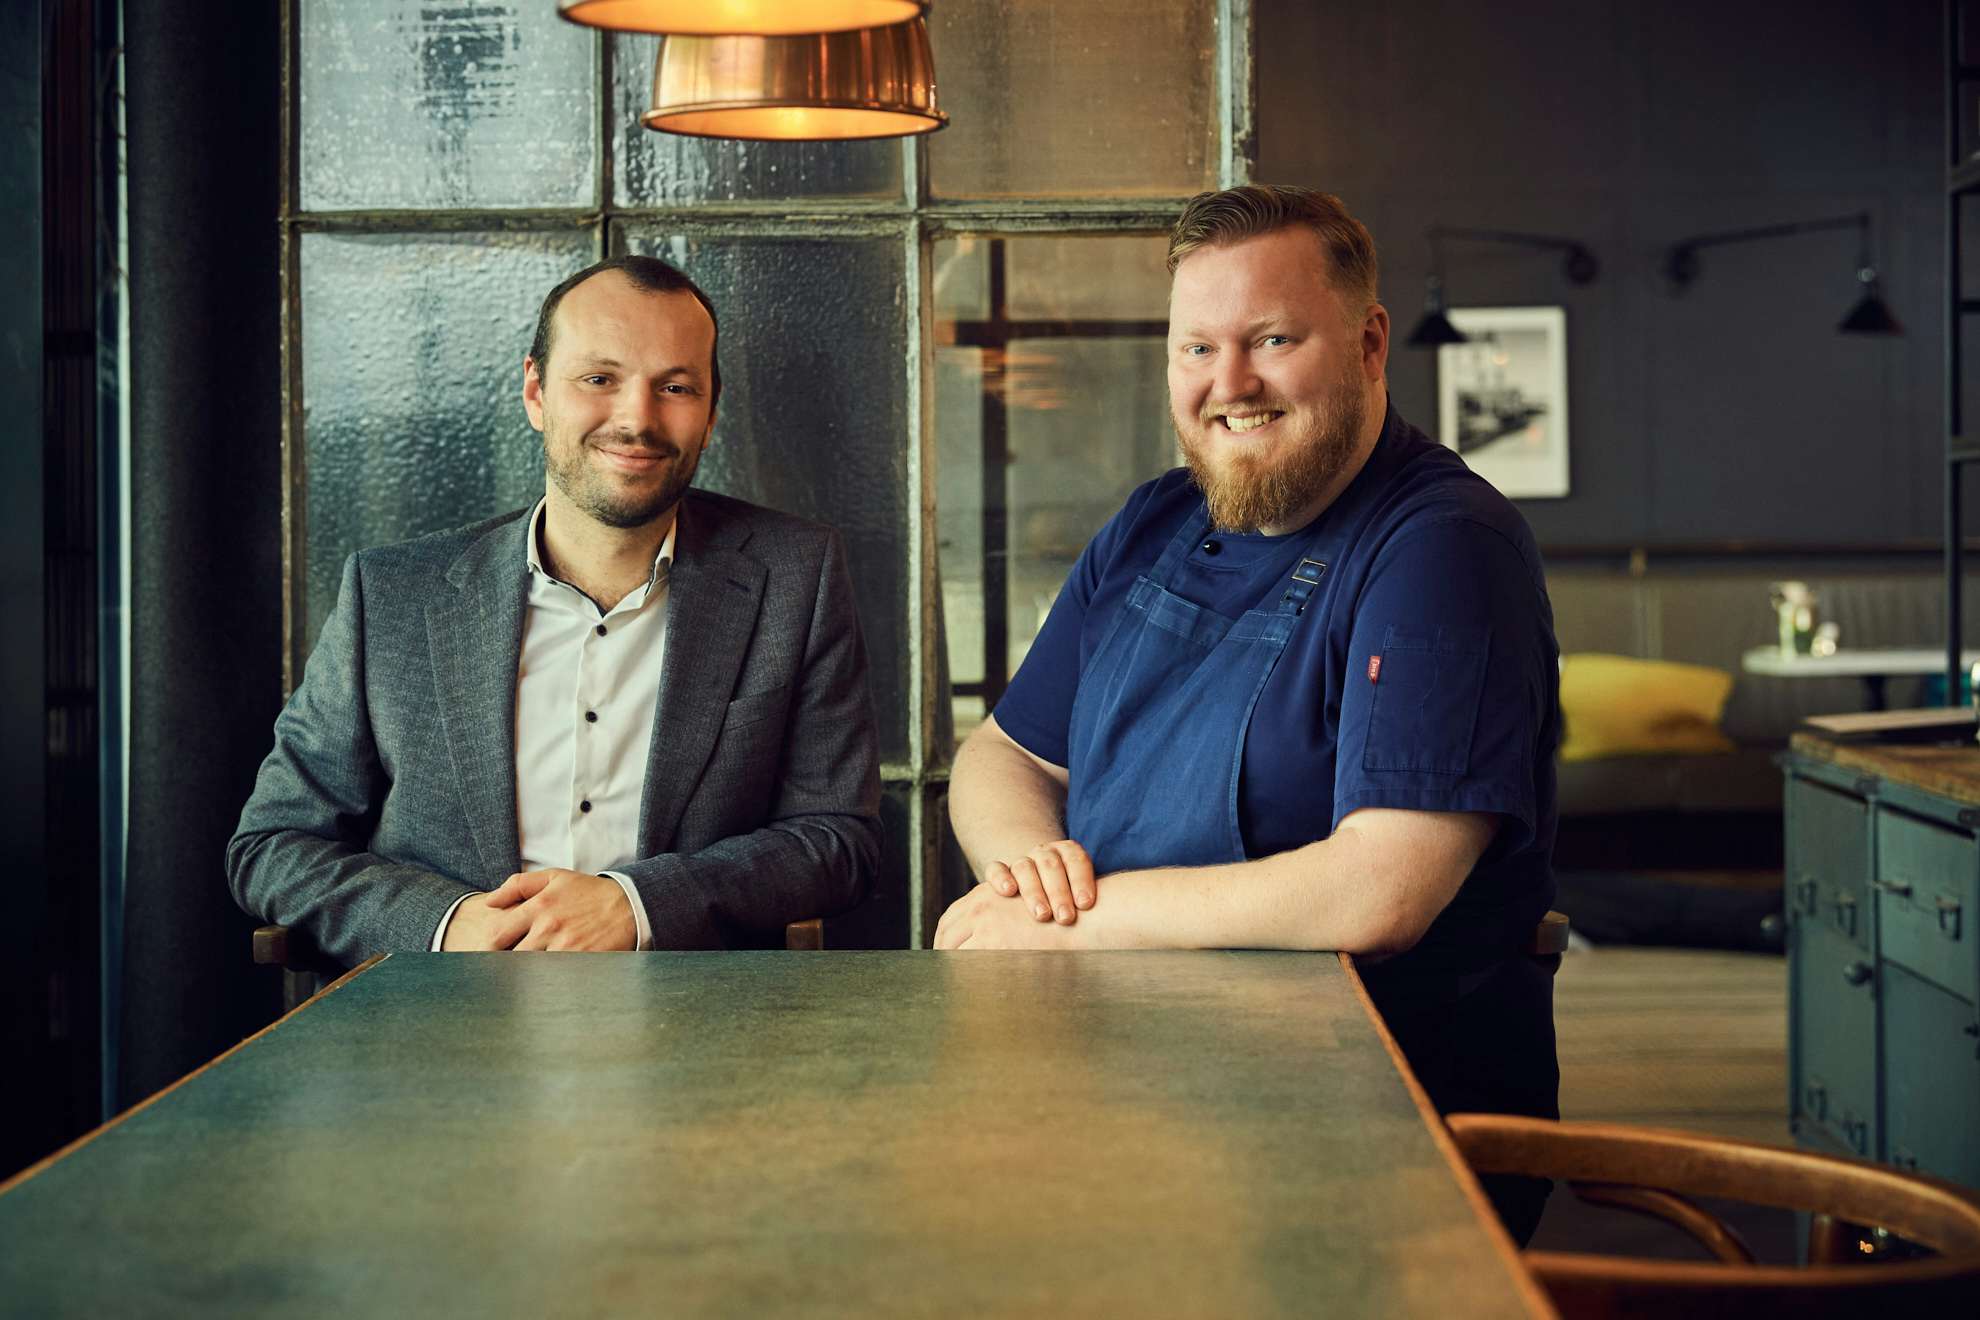 Restaurant Director and Head Chef of Brasserie Colette by Tim Raue in Berlin.